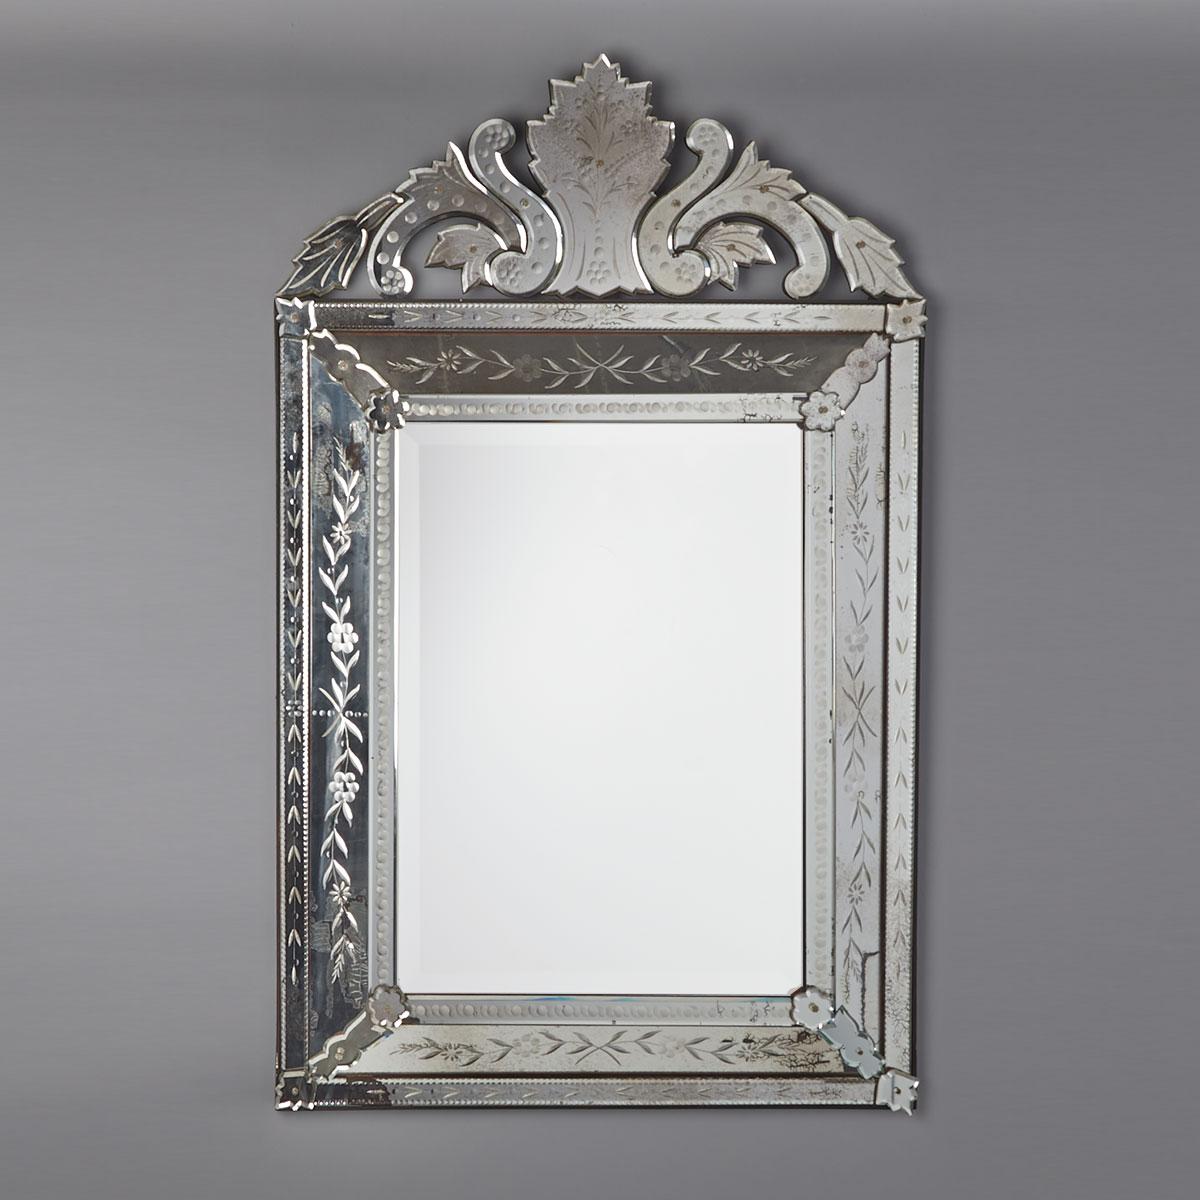 Venetian Etched Glass Mirror Framed Mirror, early 20th century